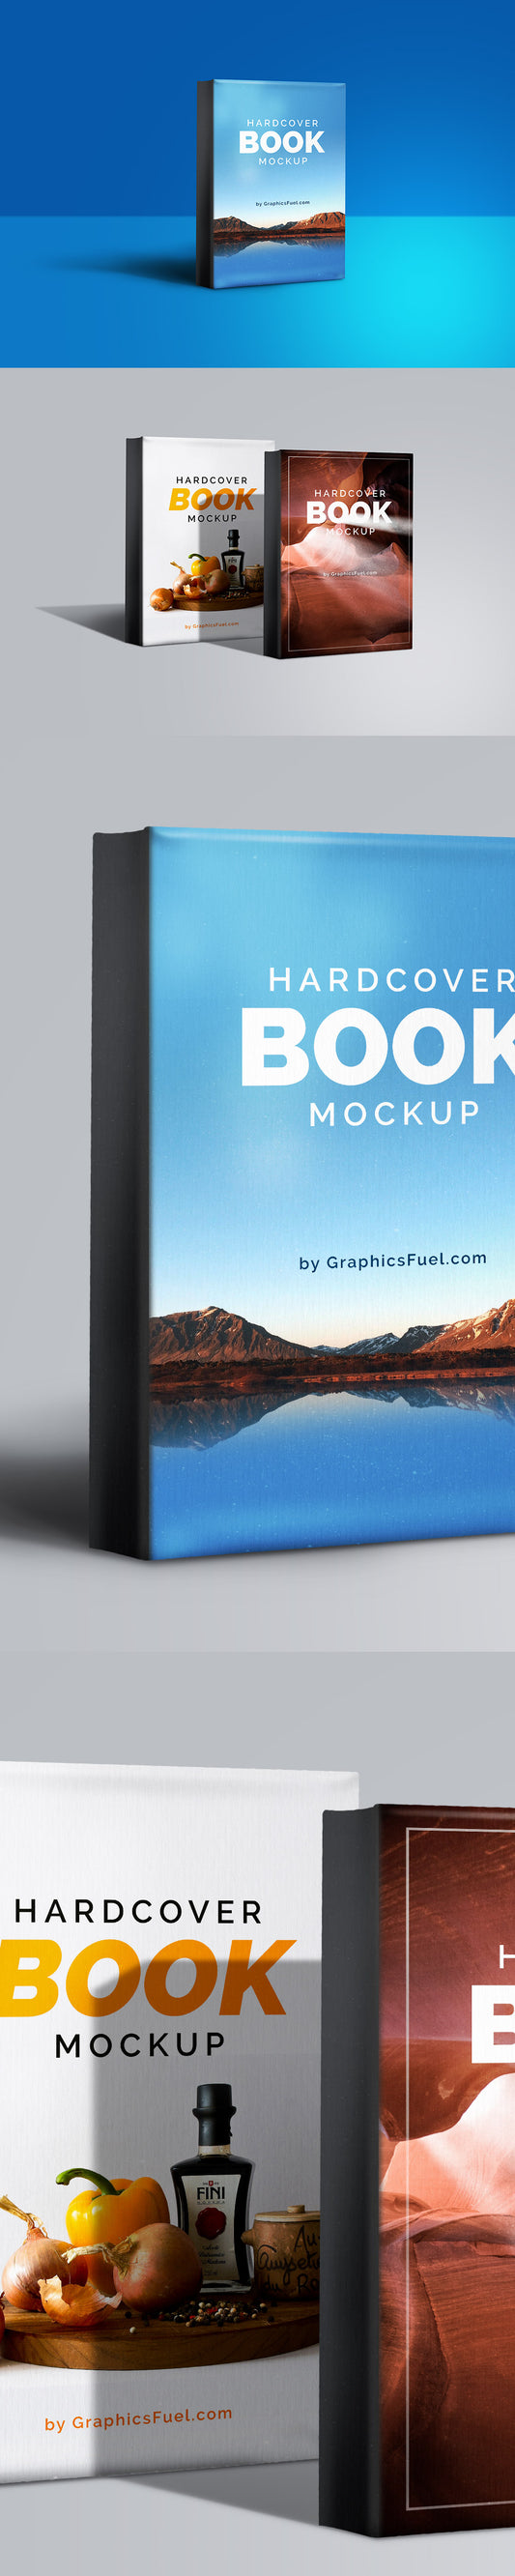 Free Hardcover Book Mockup PSD Side Angel View